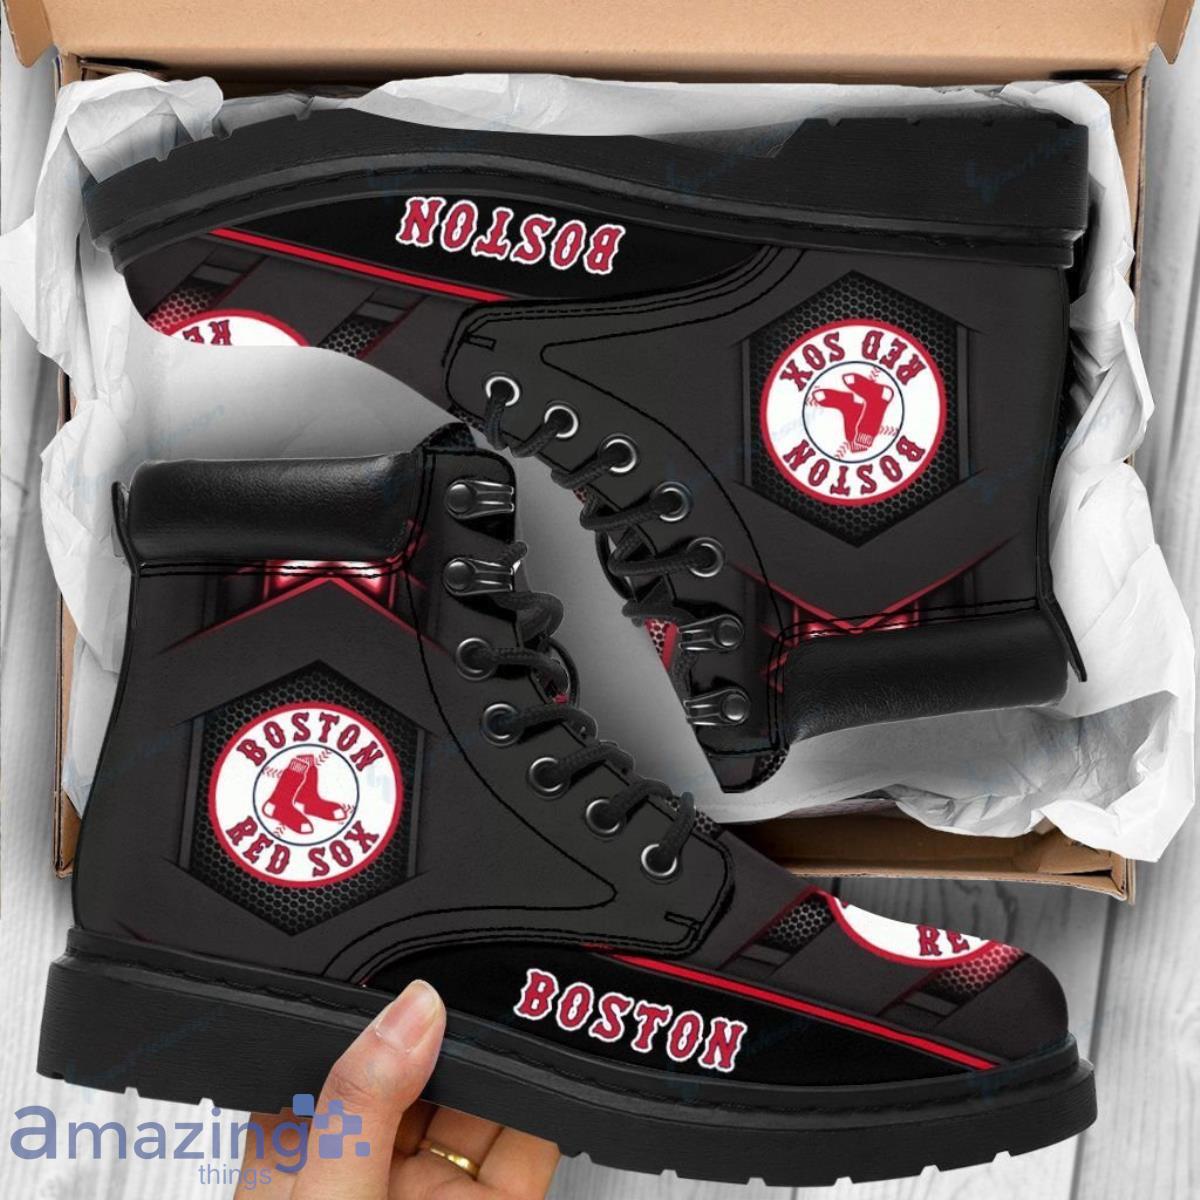 Boston Red Sox Football Team Leather Boots For Men Women Best Gift For Fans Product Photo 1